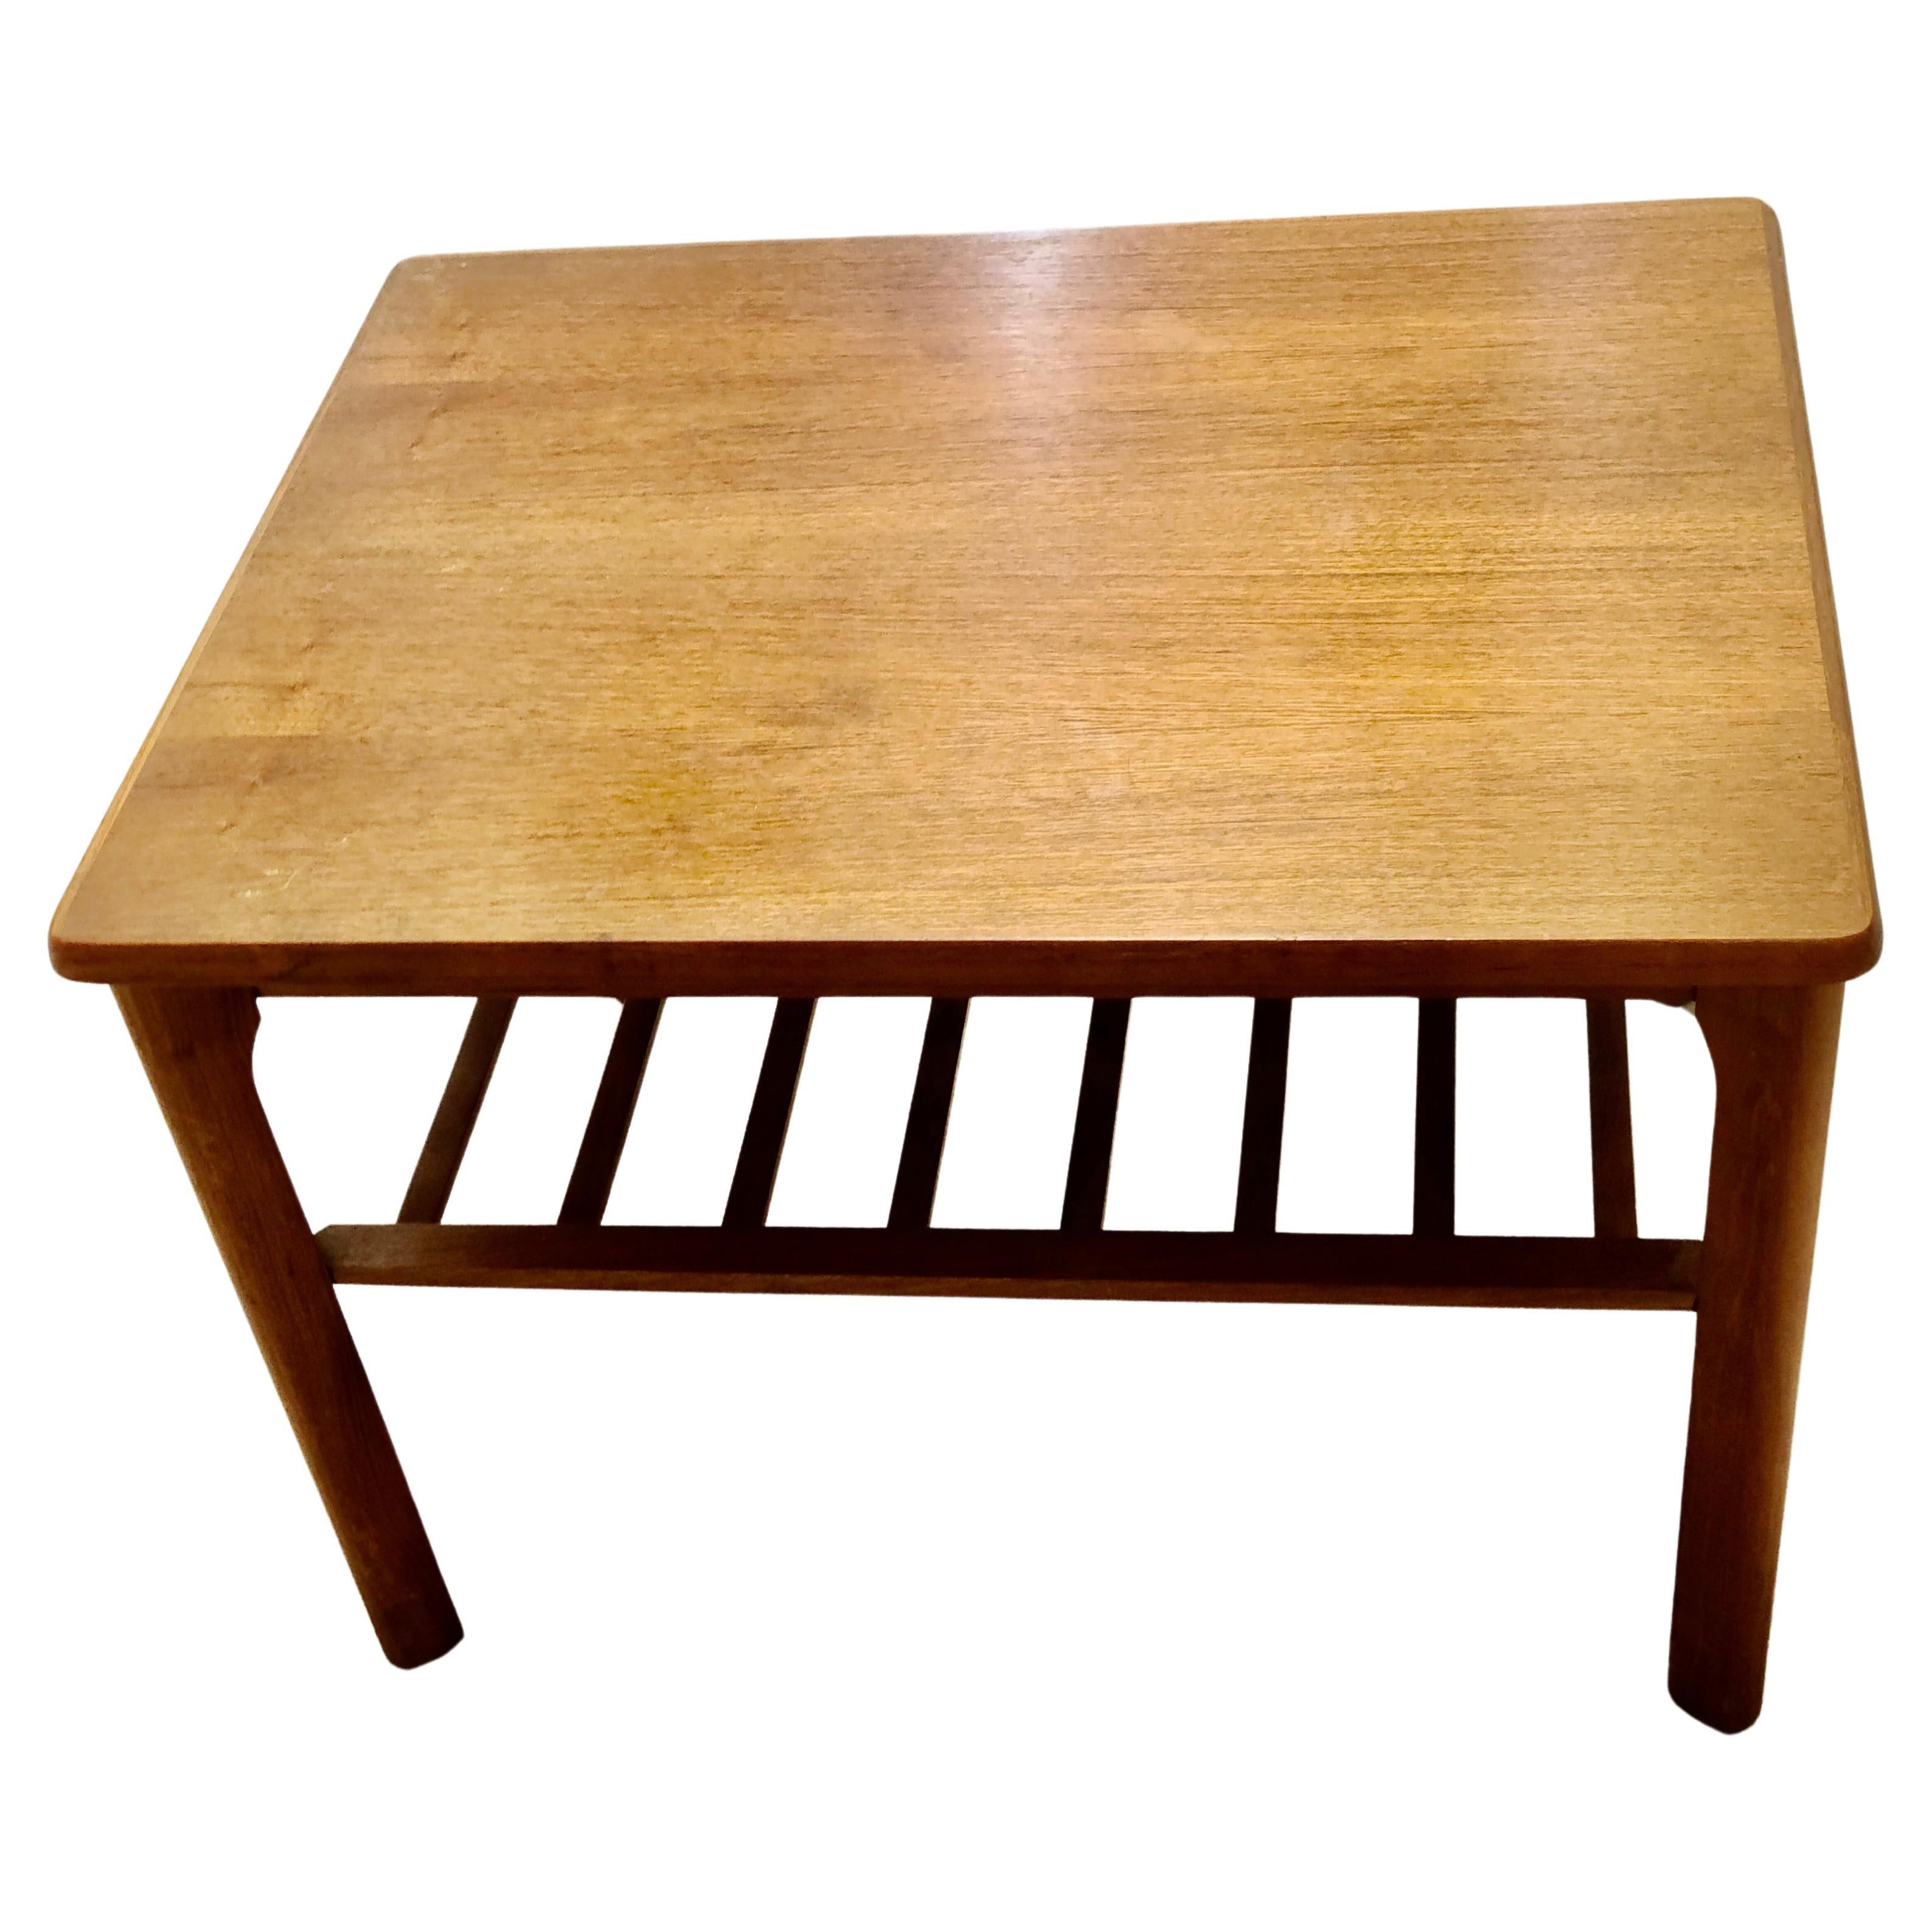 Please feel free to reach out for accurate shipping to your location.

Danish Teak two tier Side Table by Toften Mobelfabrik.

Sort of a staple item for a Danish Modern interior.